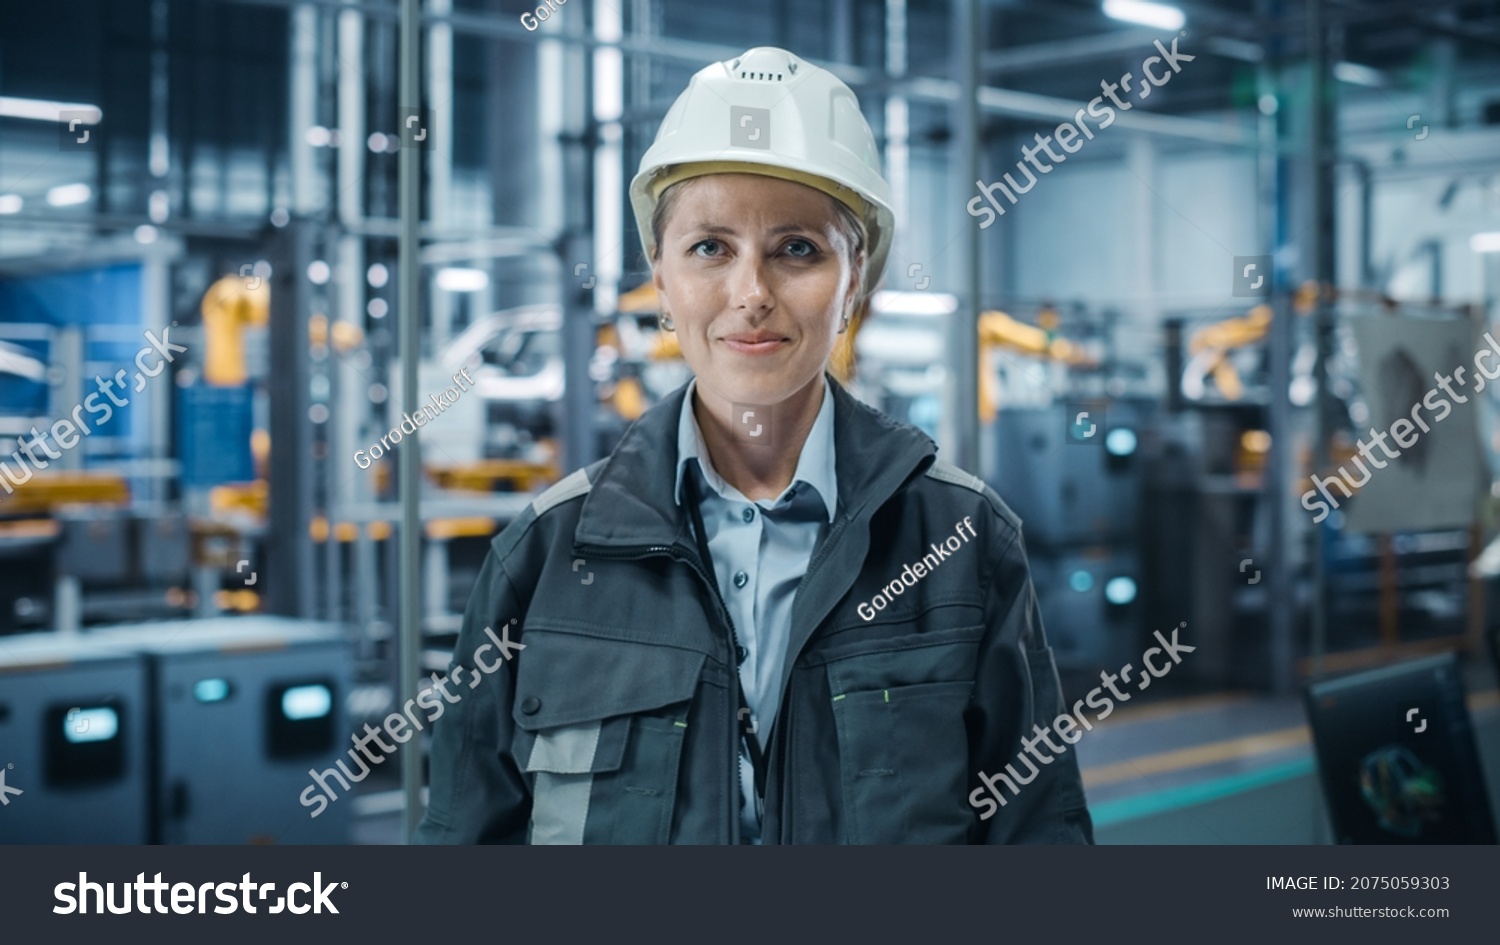 Car Factory Office: Portrait of Female Chief Engineer Wearing Hard Hat Looking at Camera, Smiling. Professional Technician. Automated Robot Arm Assembly Line Manufacturing High-Tech Electric Vehicles #2075059303